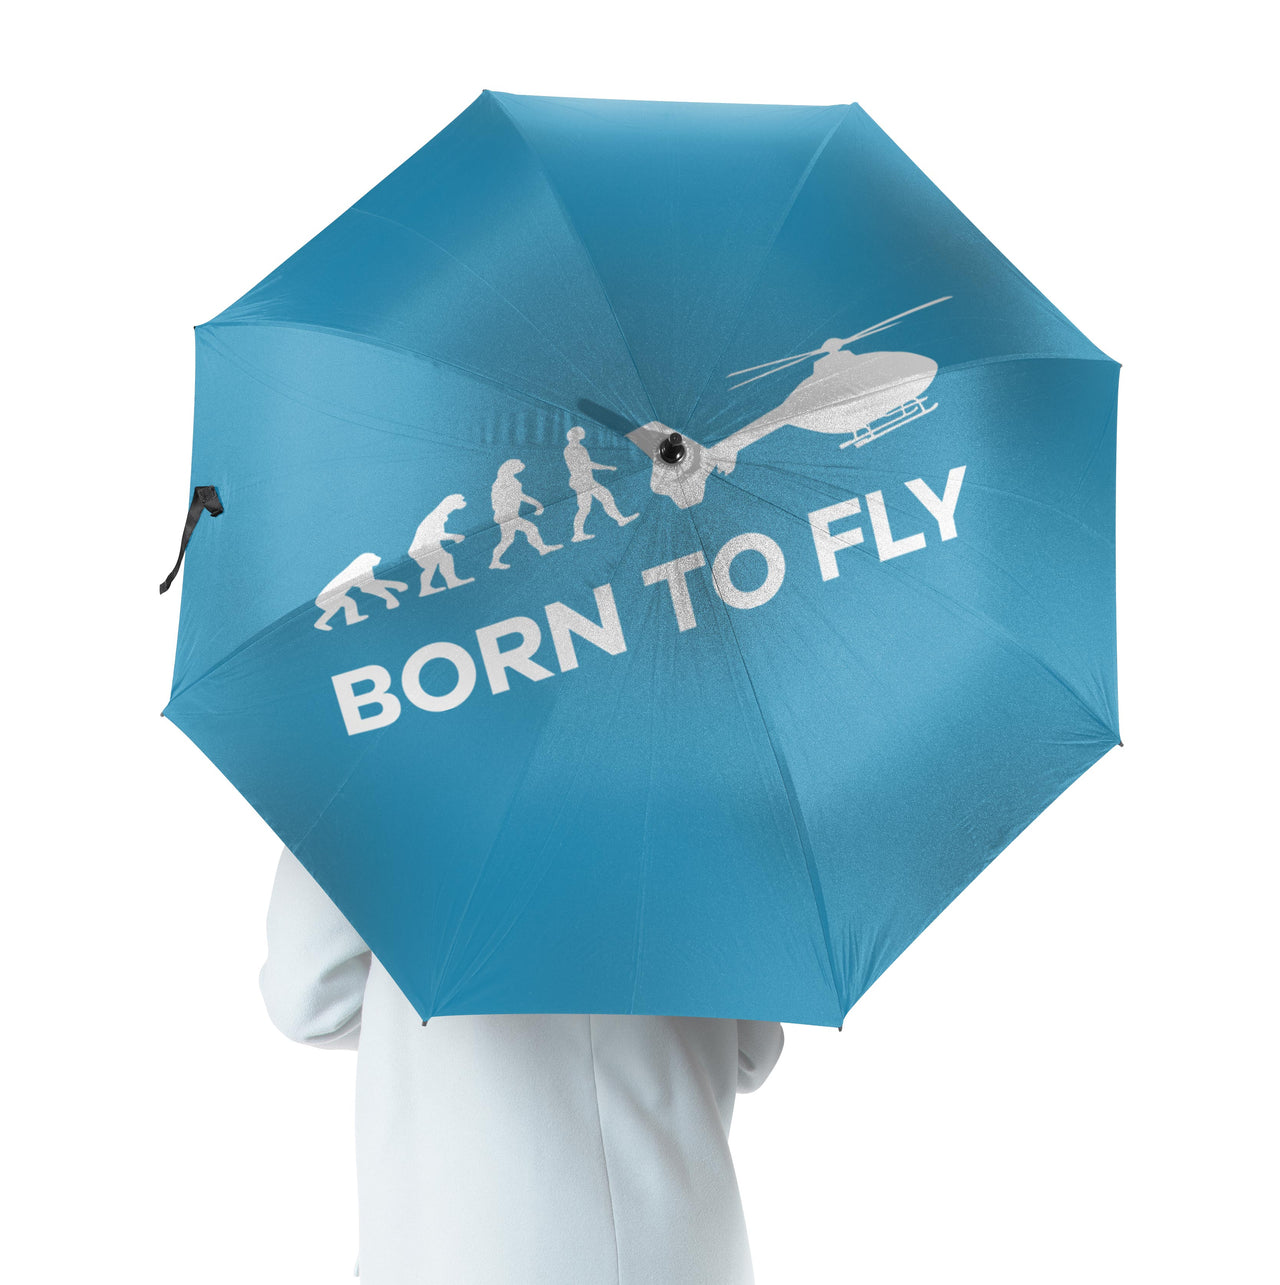 Born To Fly Helicopter Designed Umbrella